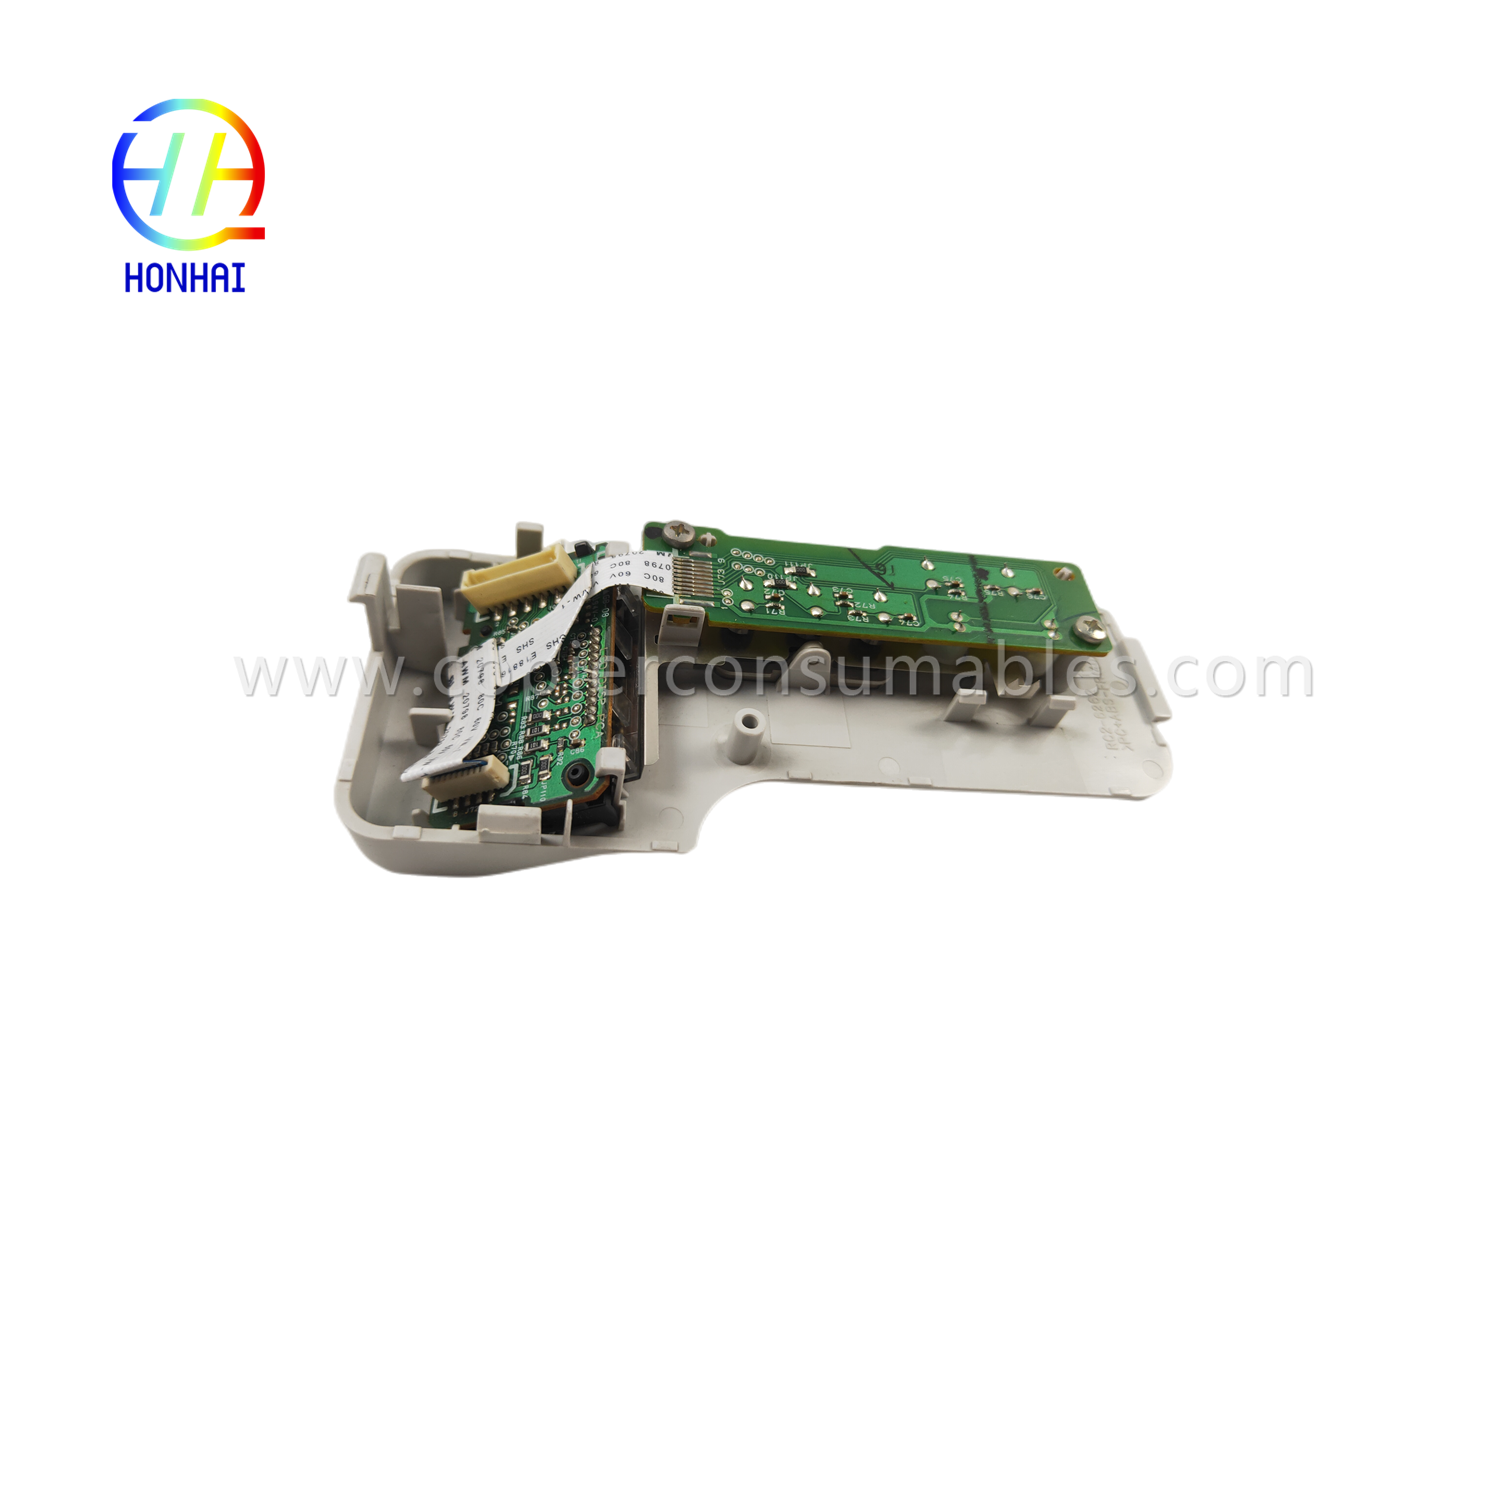 https://www.copierconsumables.com/control-panel-display-for-hp-rc2-6262-p2030-p2035-p2055dn-product/